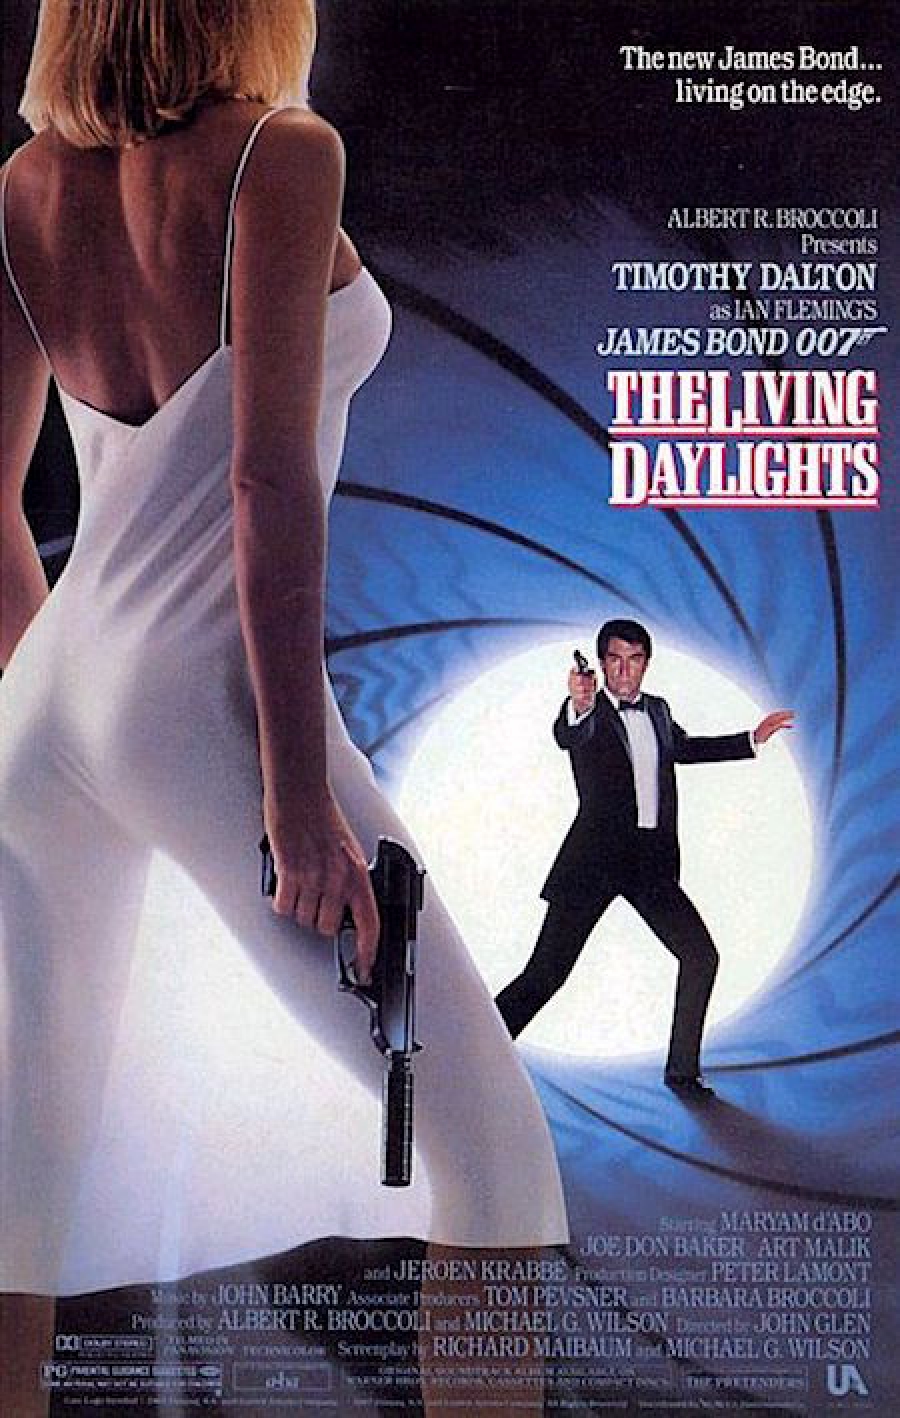 The Most Dangerous Bond Ever Remembering “the Living Daylights” On 